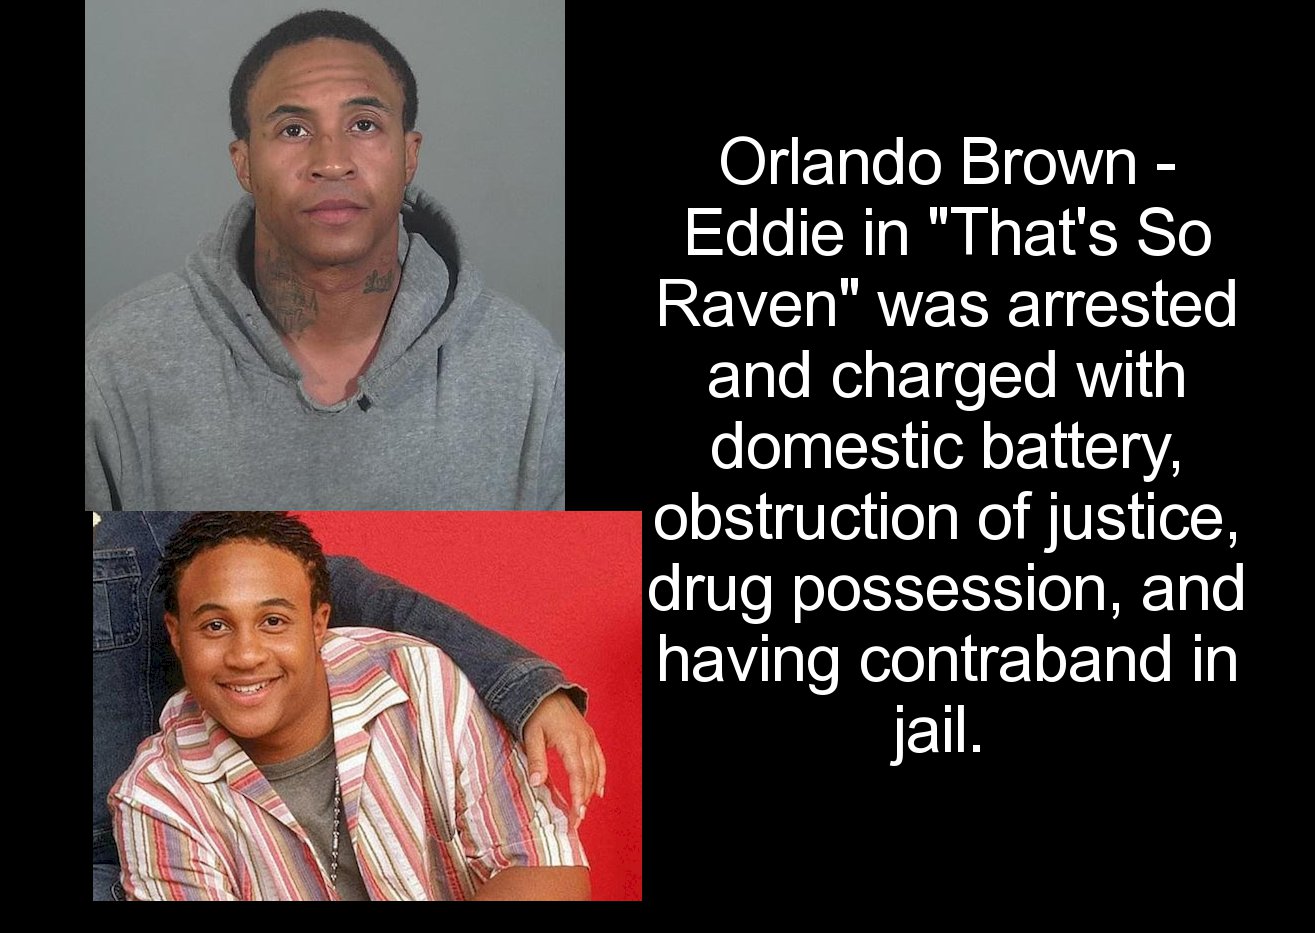 human - Orlando Brown Eddie in "That's So Raven" was arrested and charged with domestic battery, obstruction of justice, drug possession, and having contraband in jail.